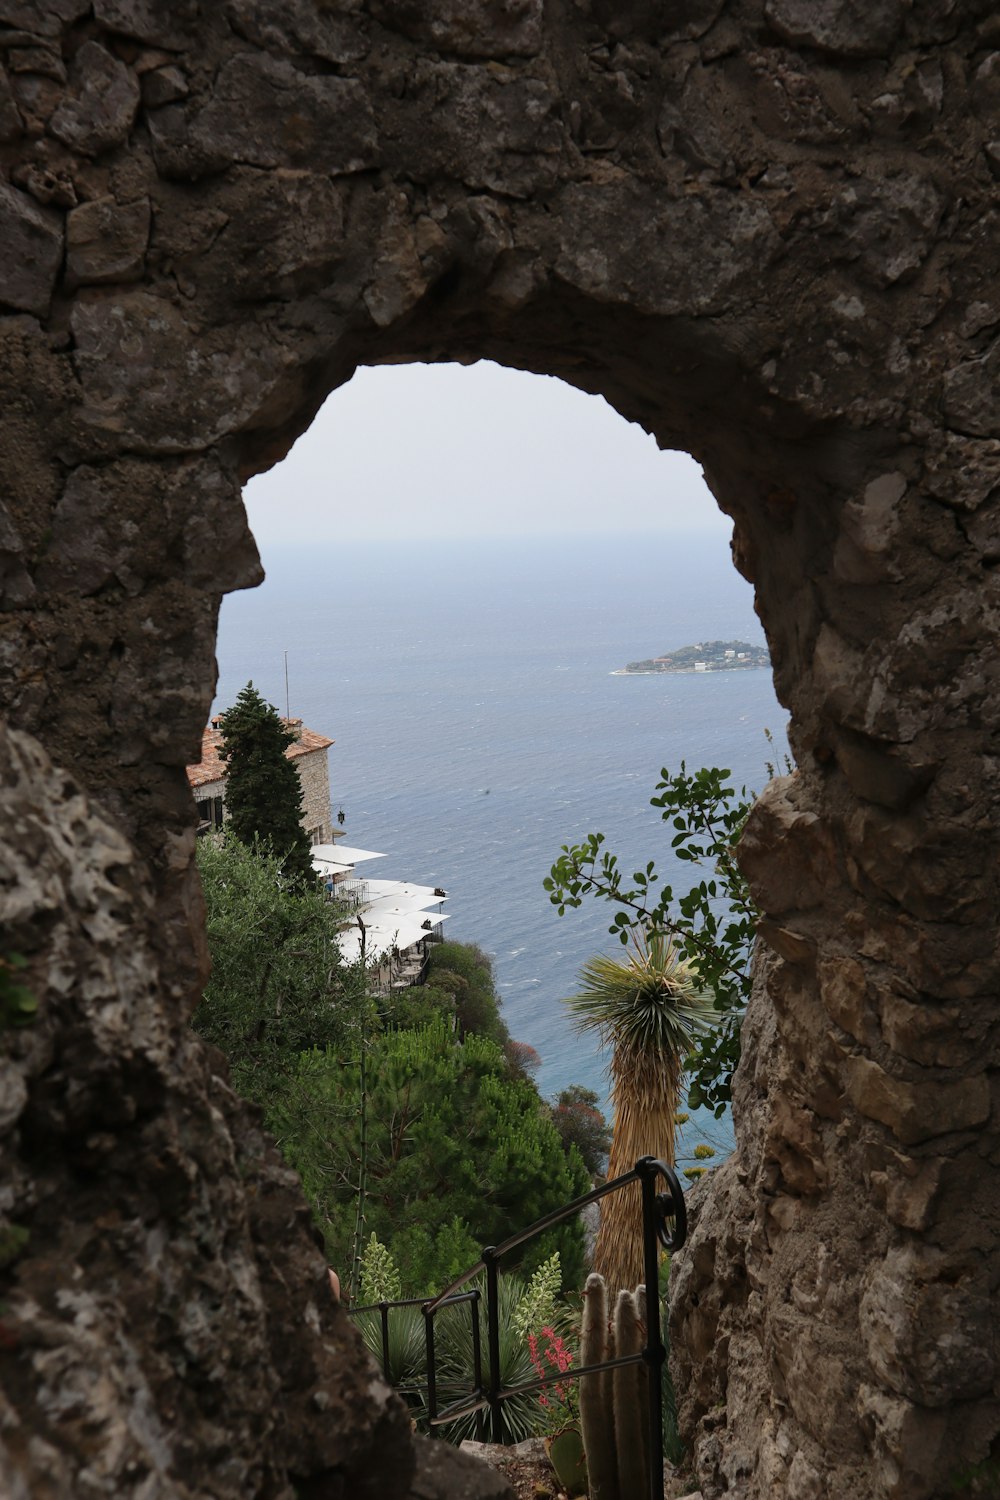 a view of a body of water through a hole in a stone wall